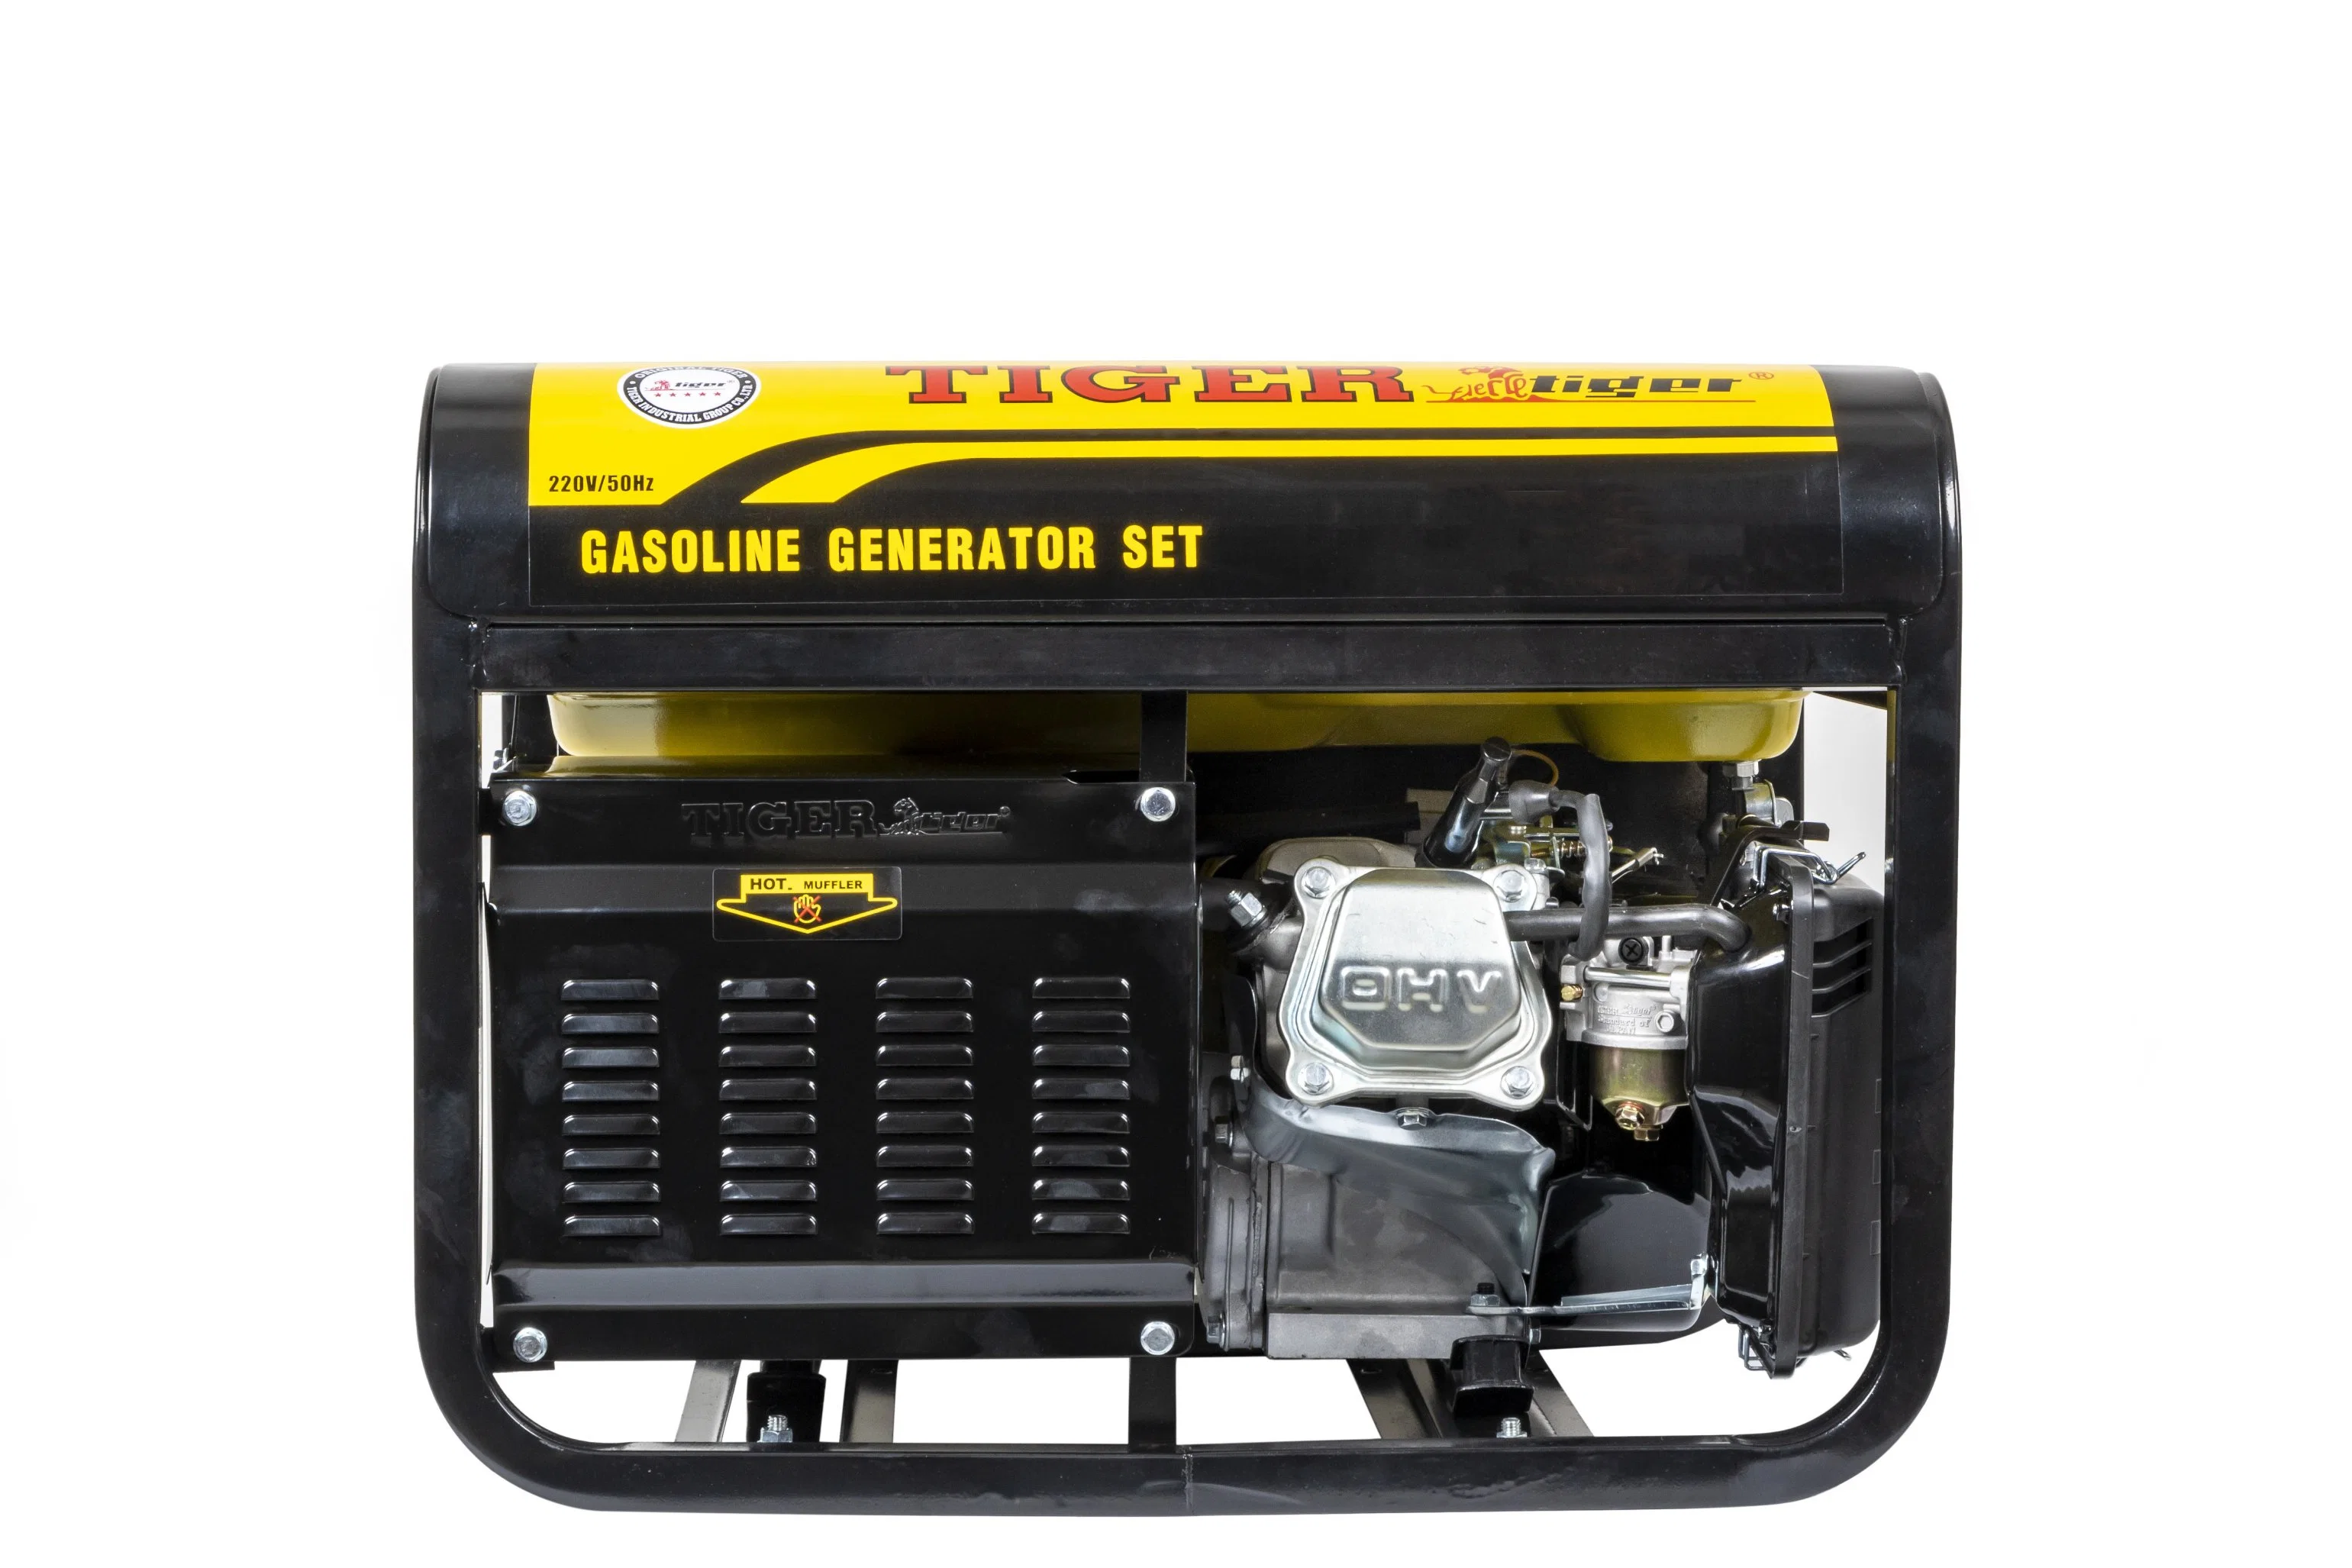 Tiger 100% Copper Tng8000/8800A/Ae Petrol/Gasoline/Fuel. Portable. Power. silent. Generator of 2.0kw-7.5kw, 5.5HP-18HP Recoil/Electric Start Open Structure